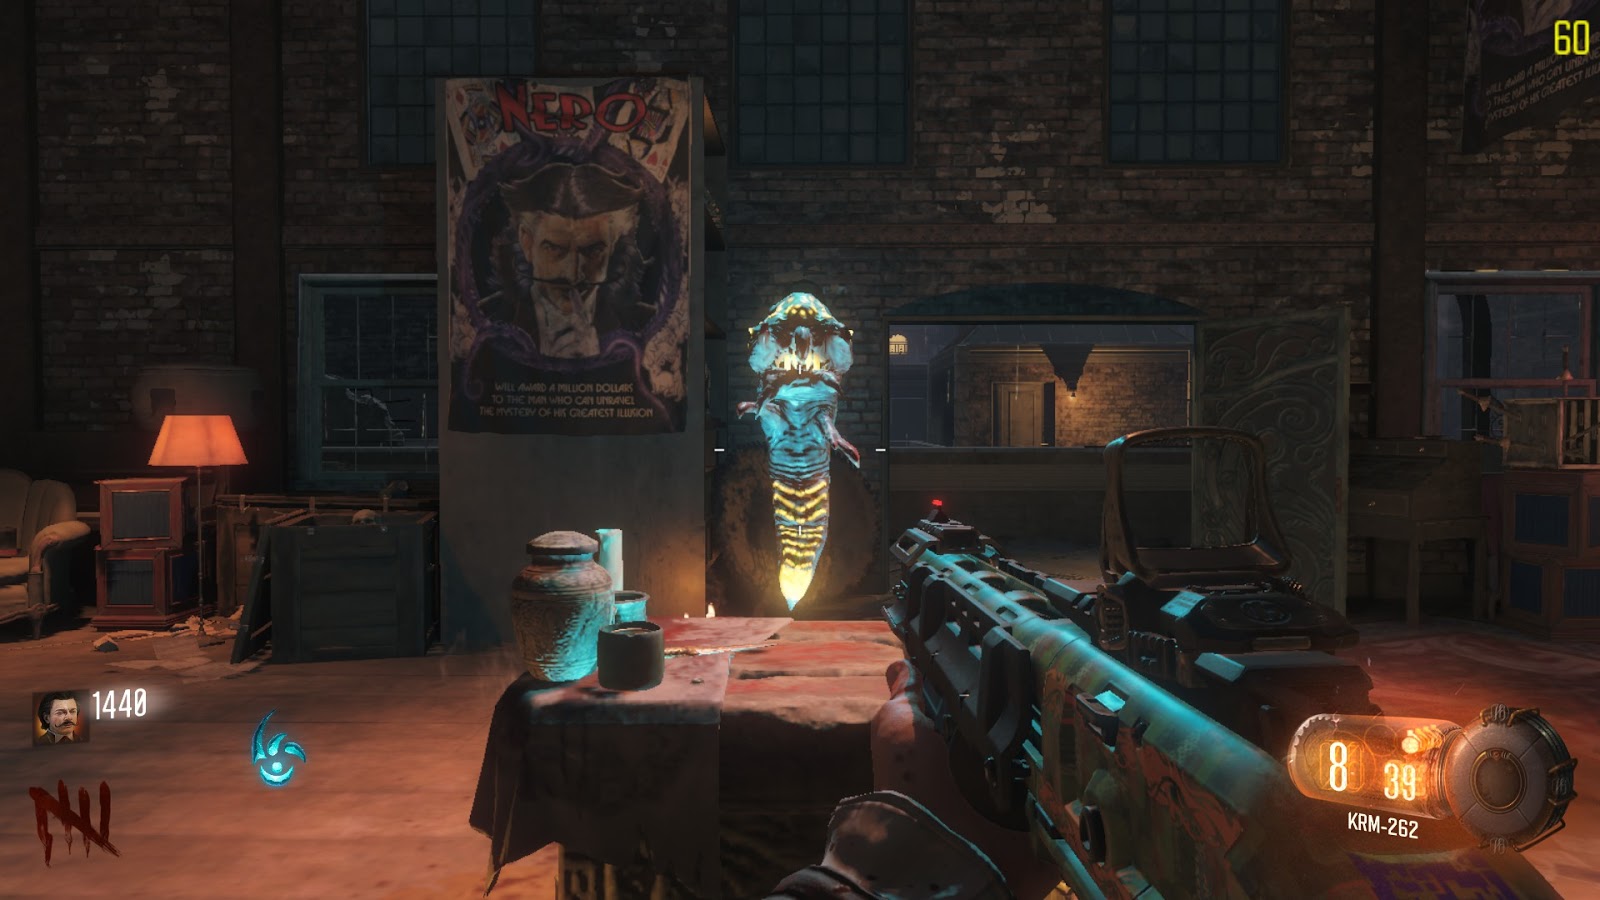 Unlocking All Secrets in Shadows of Evil on Call of Duty: Black Ops 3.